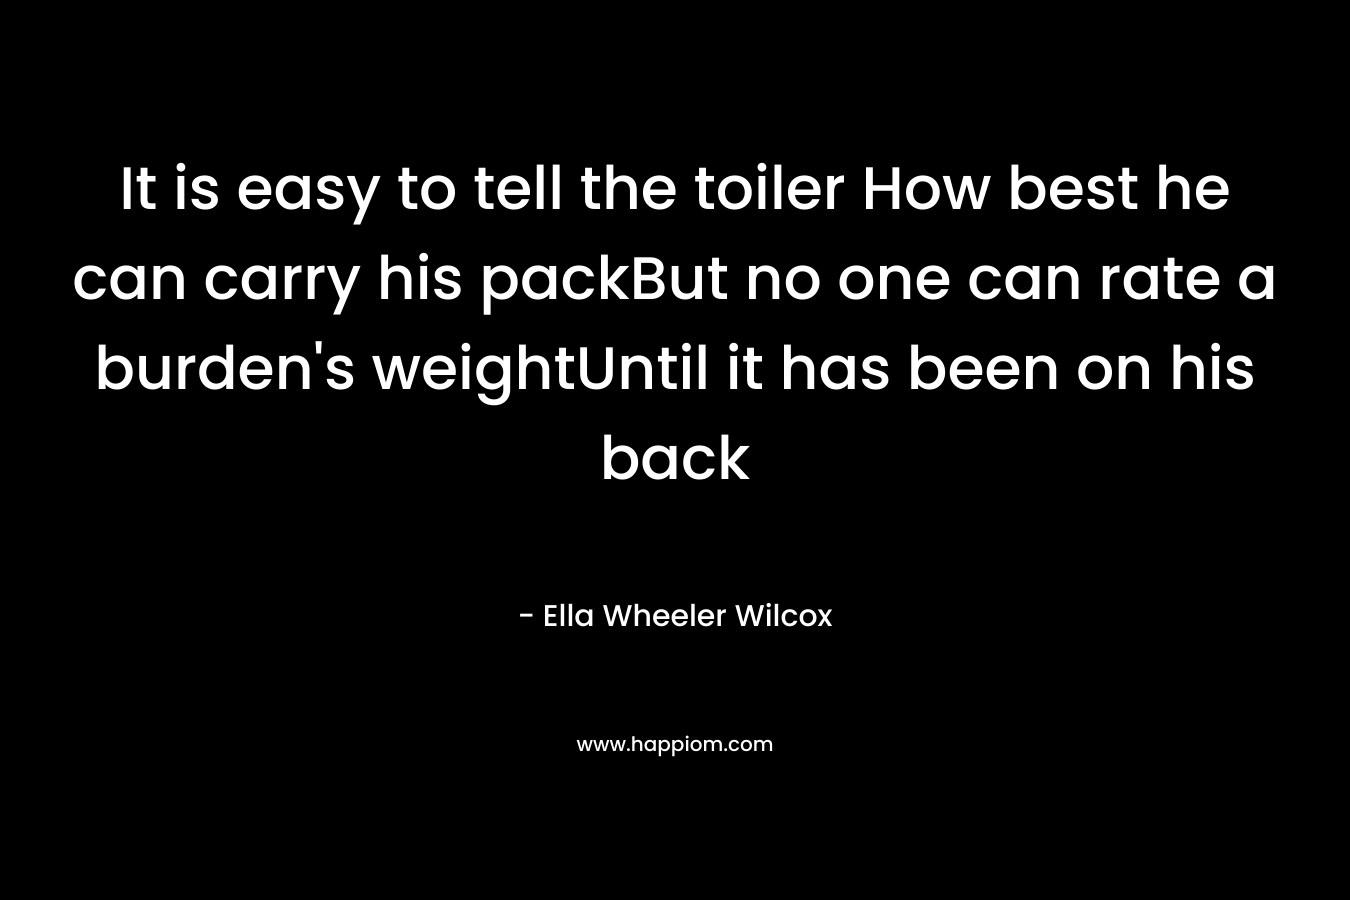 It is easy to tell the toiler How best he can carry his packBut no one can rate a burden's weightUntil it has been on his back